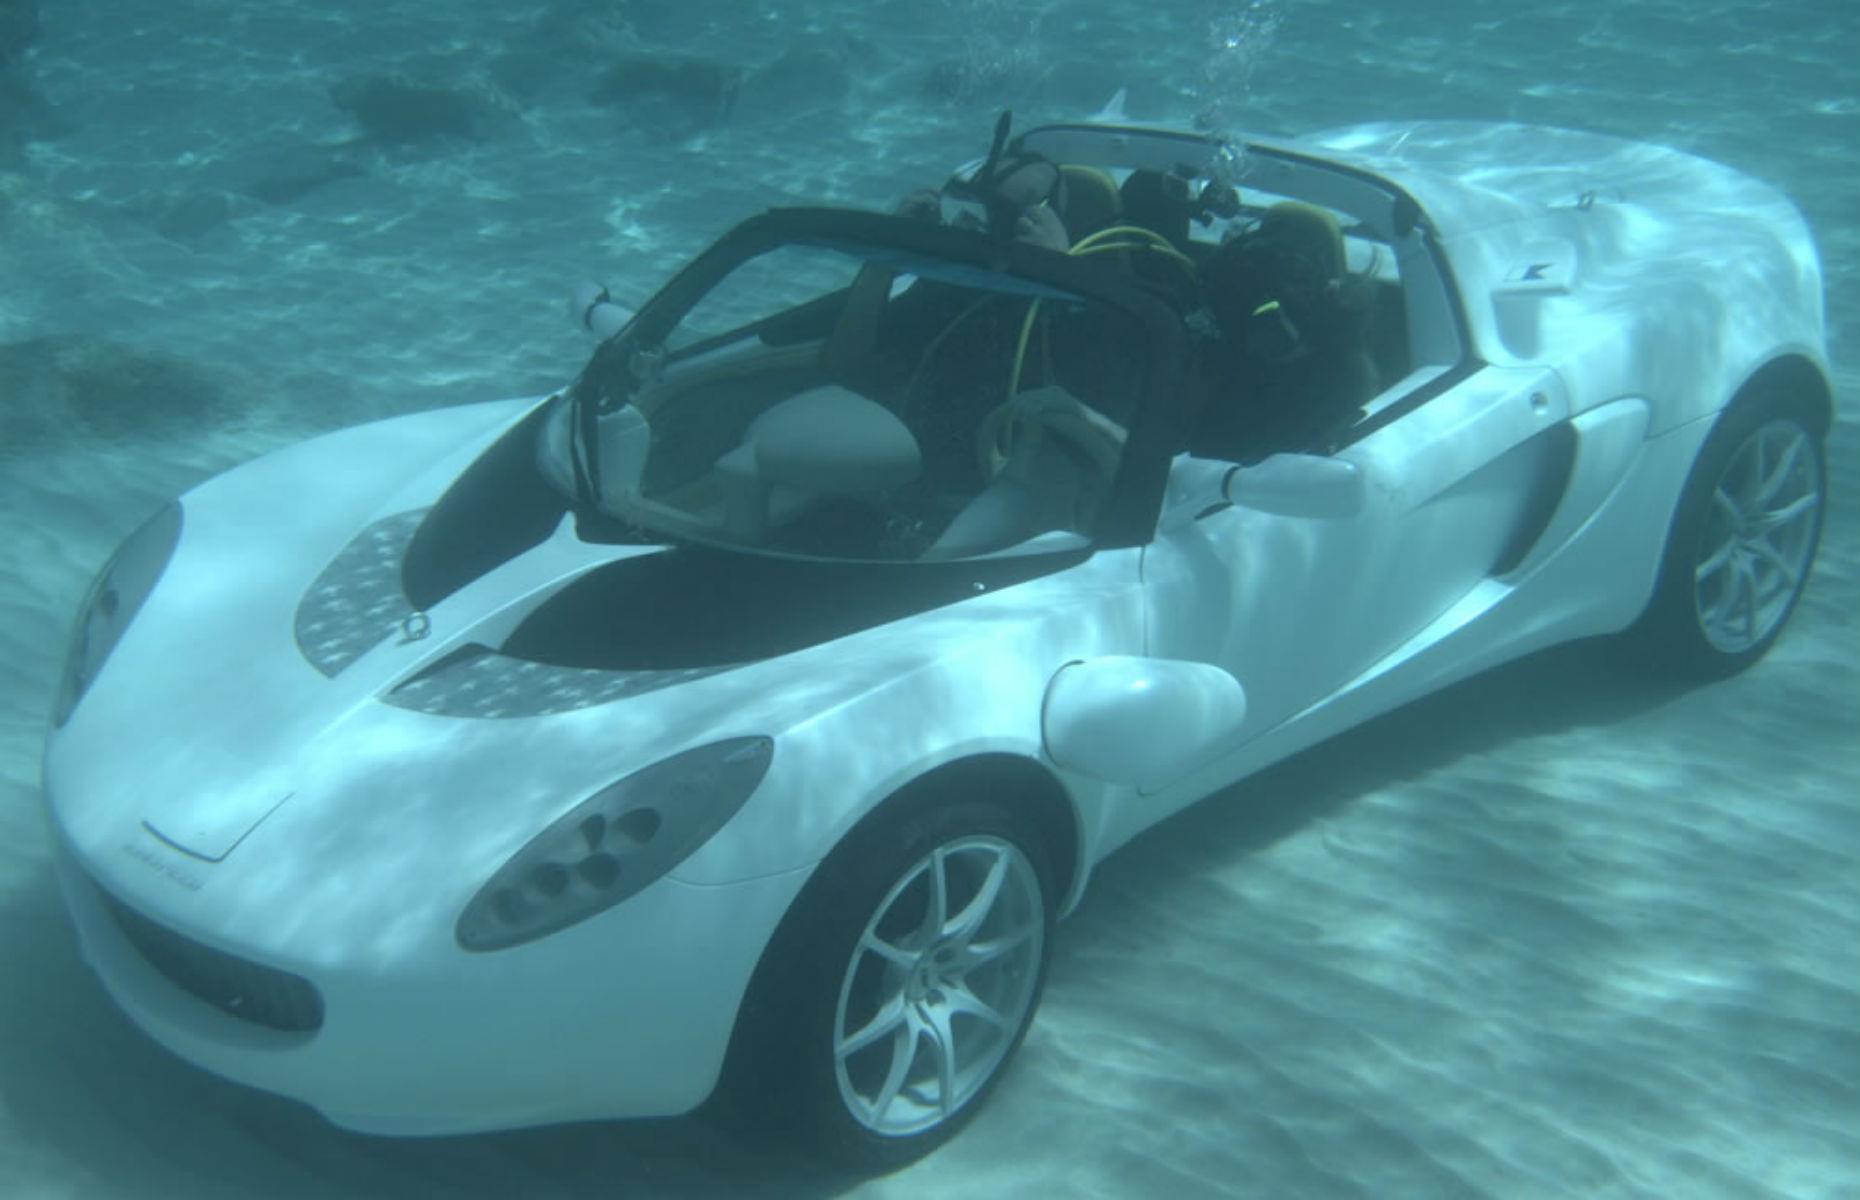 Have your own James Bond experience in an amphibious car